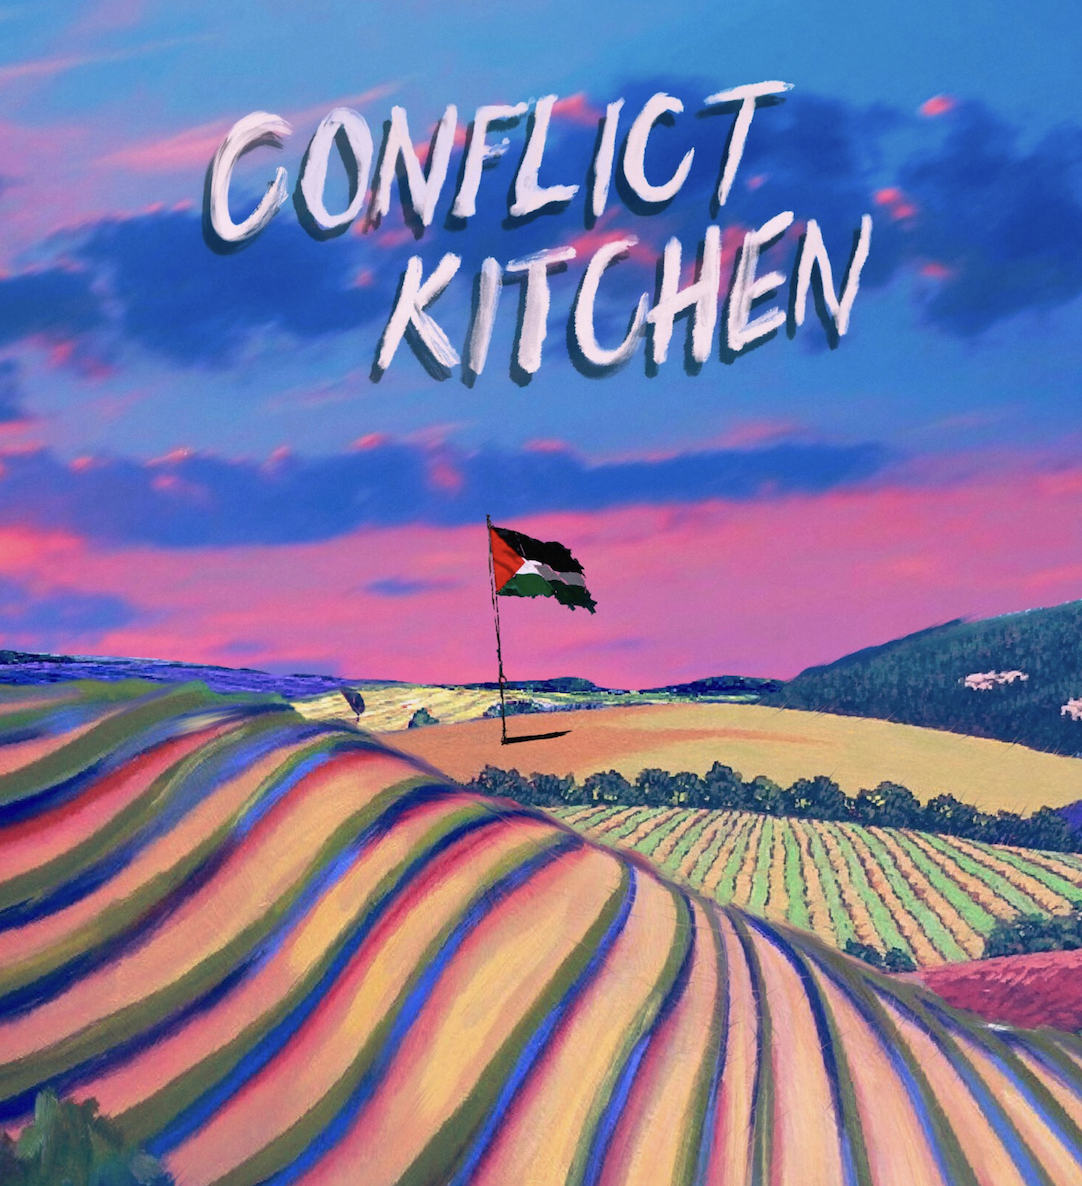 Conflict+Kitchen%3A+Students+Discuss+Ongoing+Crisis+in+Palestine+While+Preparing+Traditional+Dishes